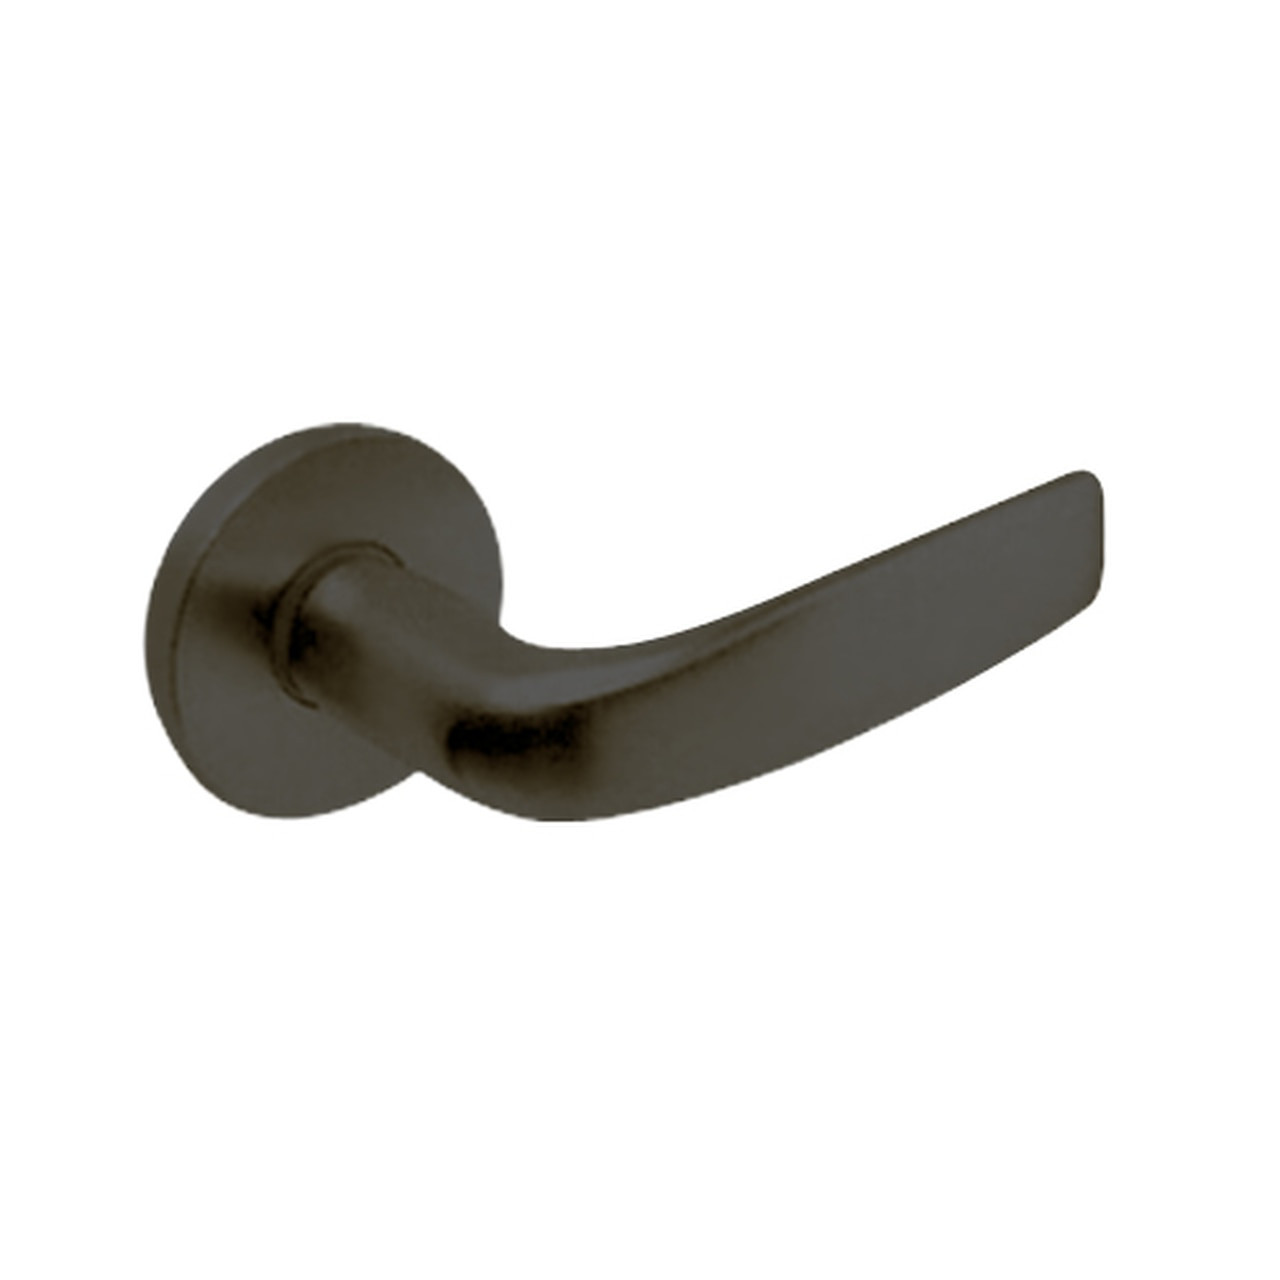 ML2058-CSB-613 Corbin Russwin ML2000 Series Mortise Entrance Holdback Locksets with Citation Lever in Oil Rubbed Bronze